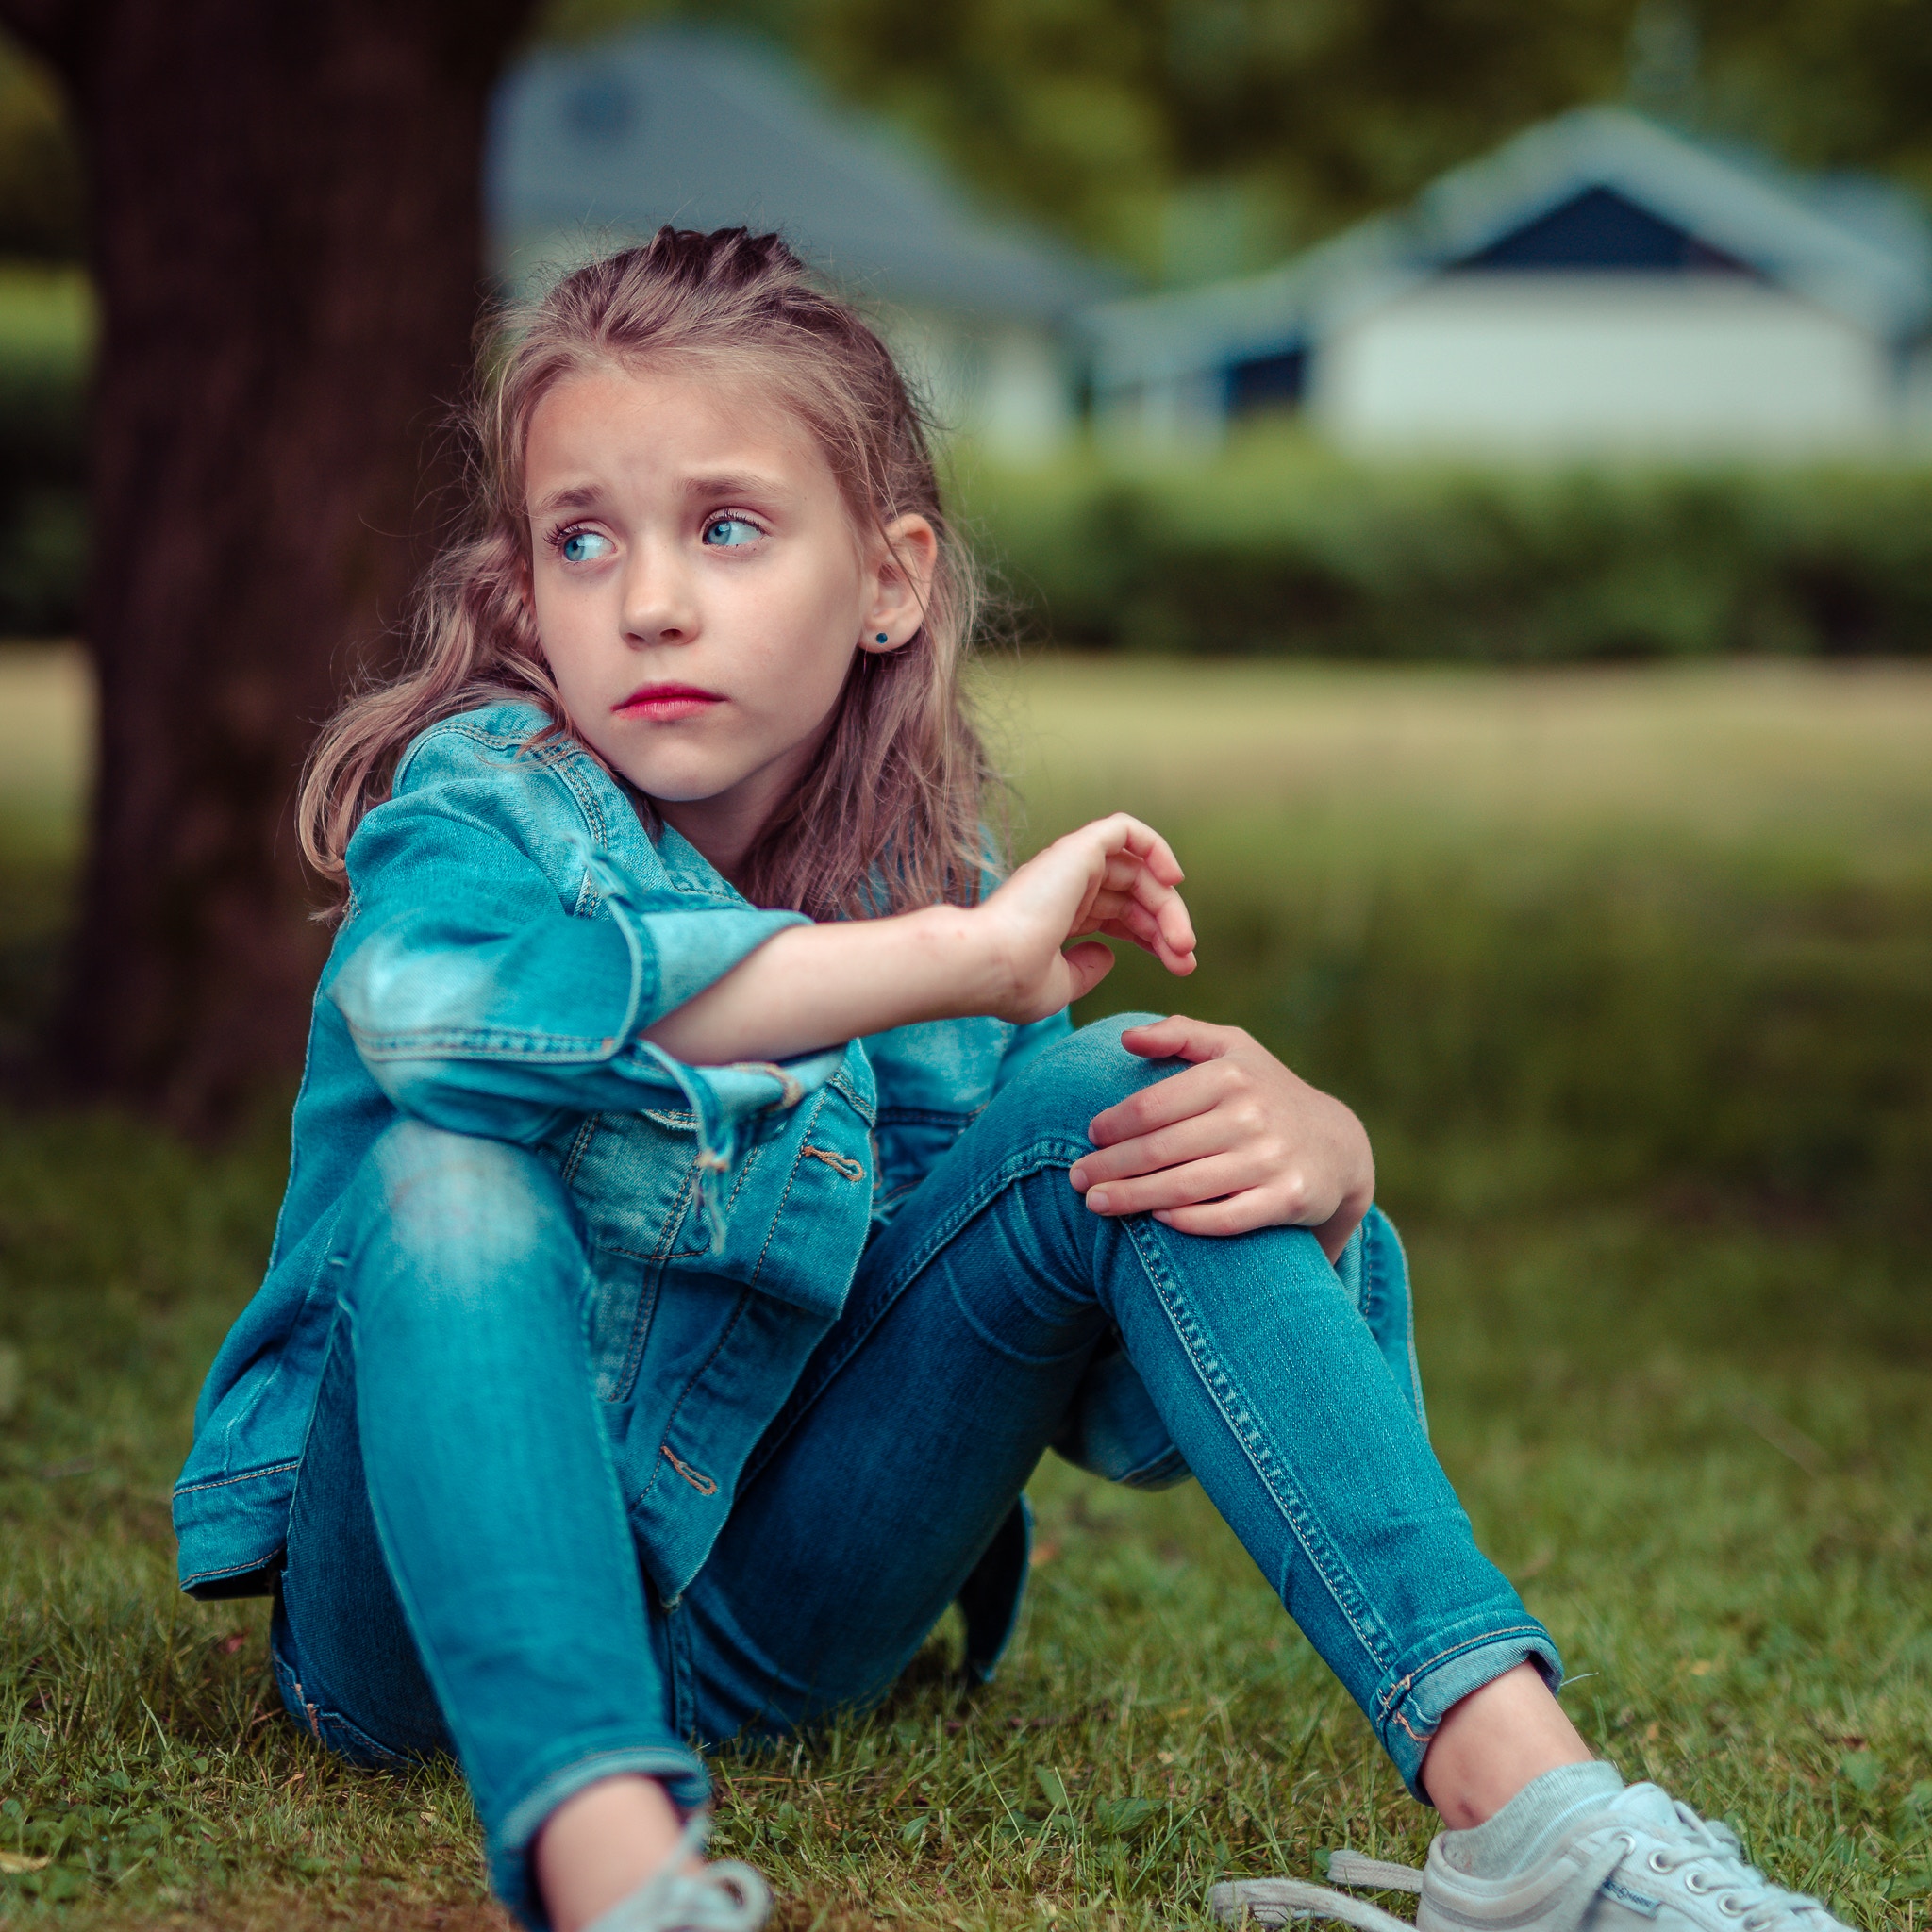 events can cause stress in children